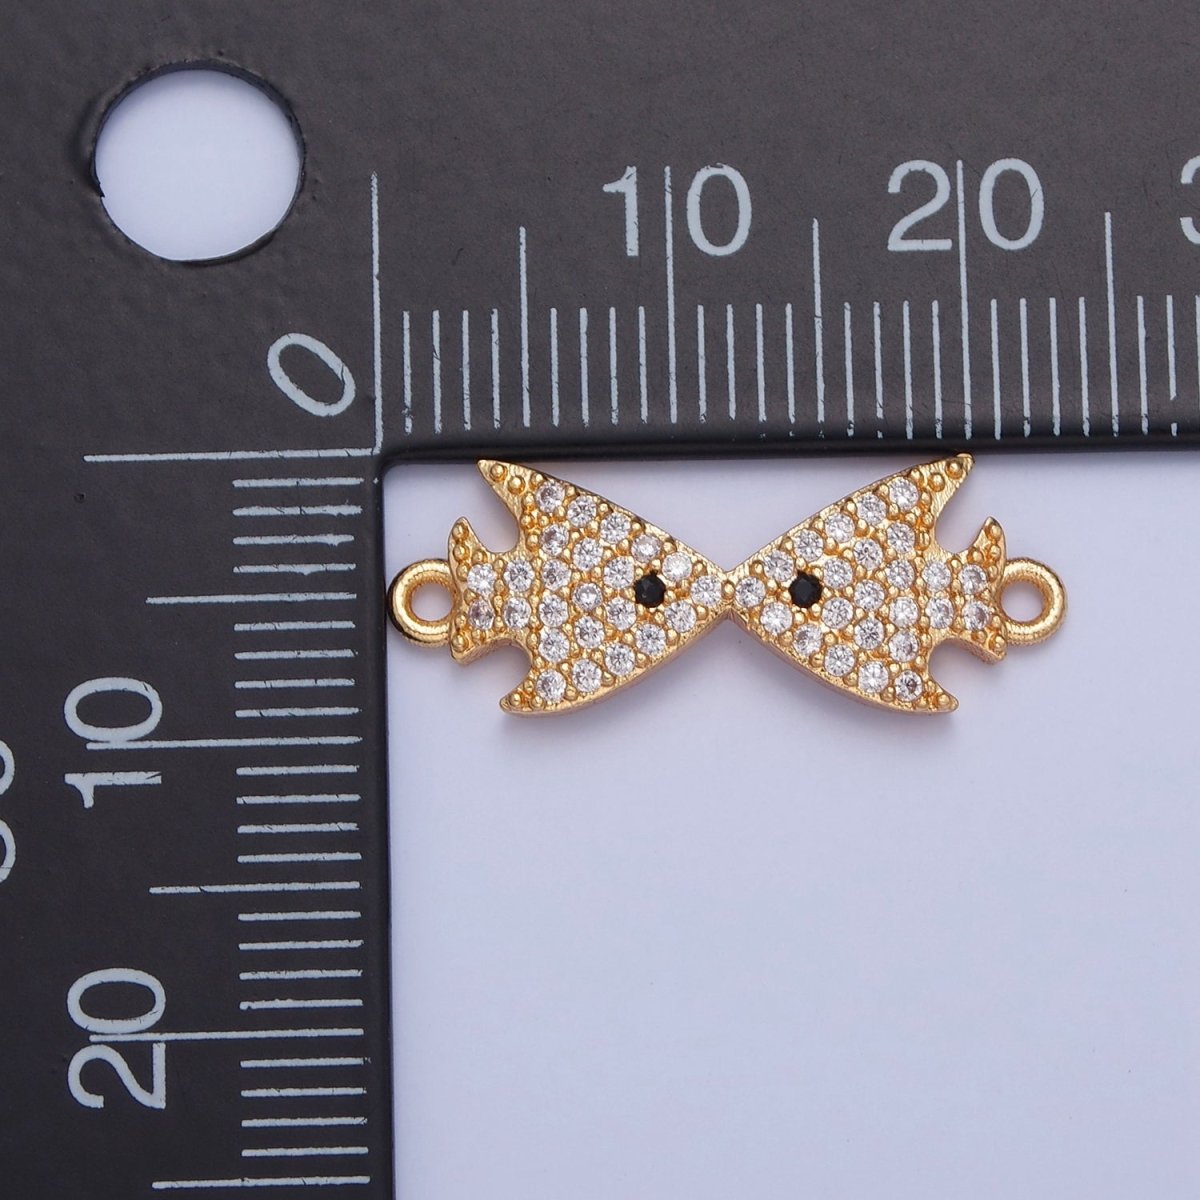 Dainty Kiss Fish CZ Gold Pave Charm Connector for Bracelet Necklace Supply F-321 - DLUXCA